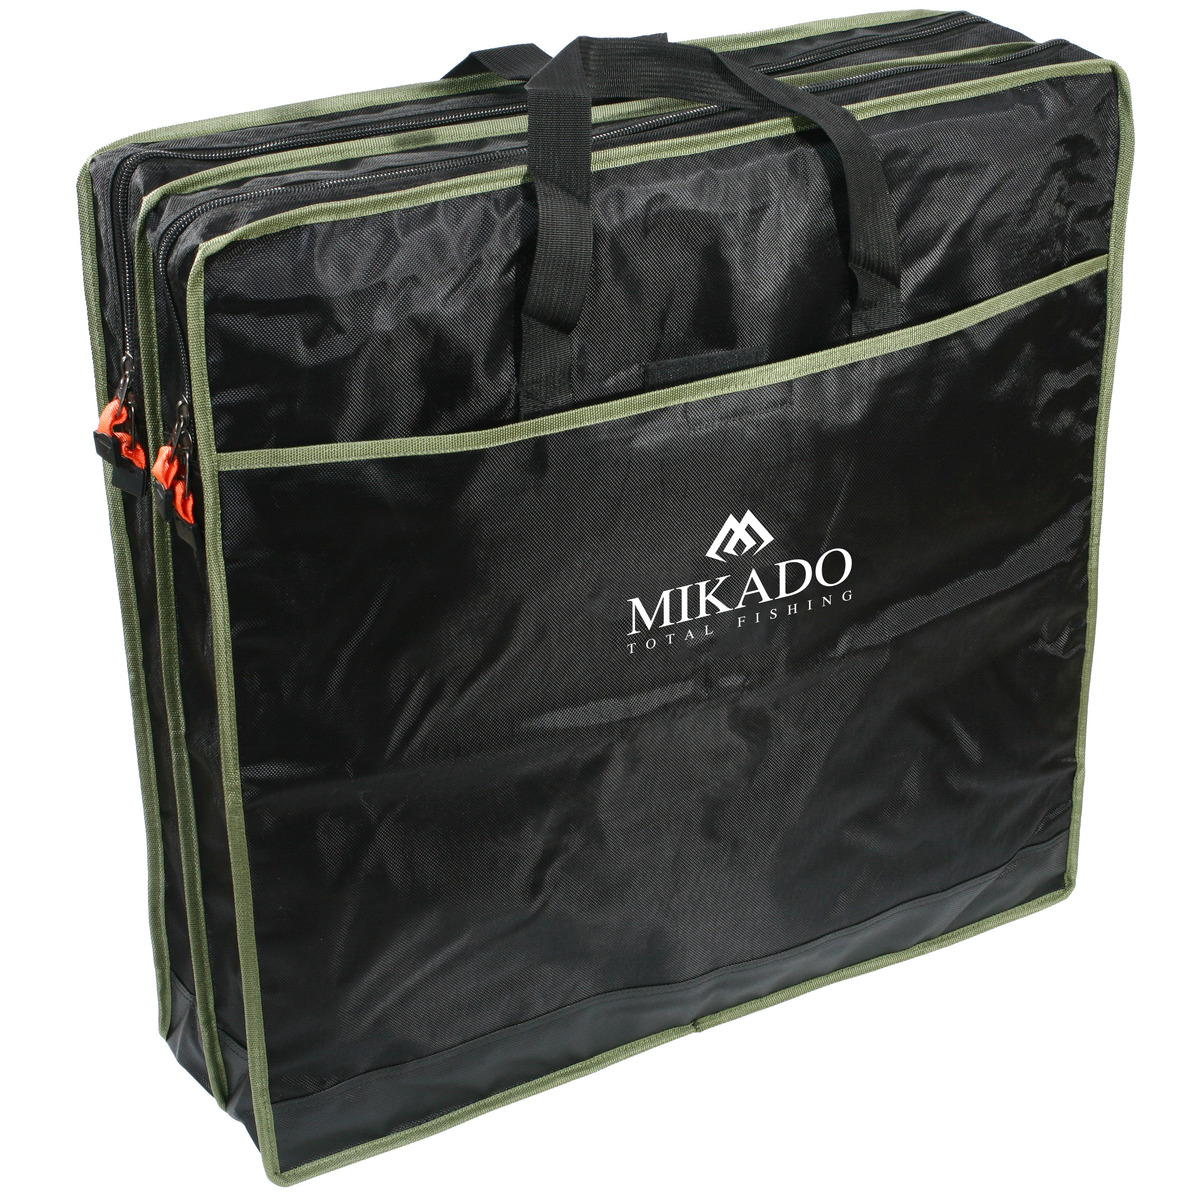 Mikado Bagfor Keepnets 1 Compartment - SQUARE (63x63x18 cm)  BLACK AND GREEN